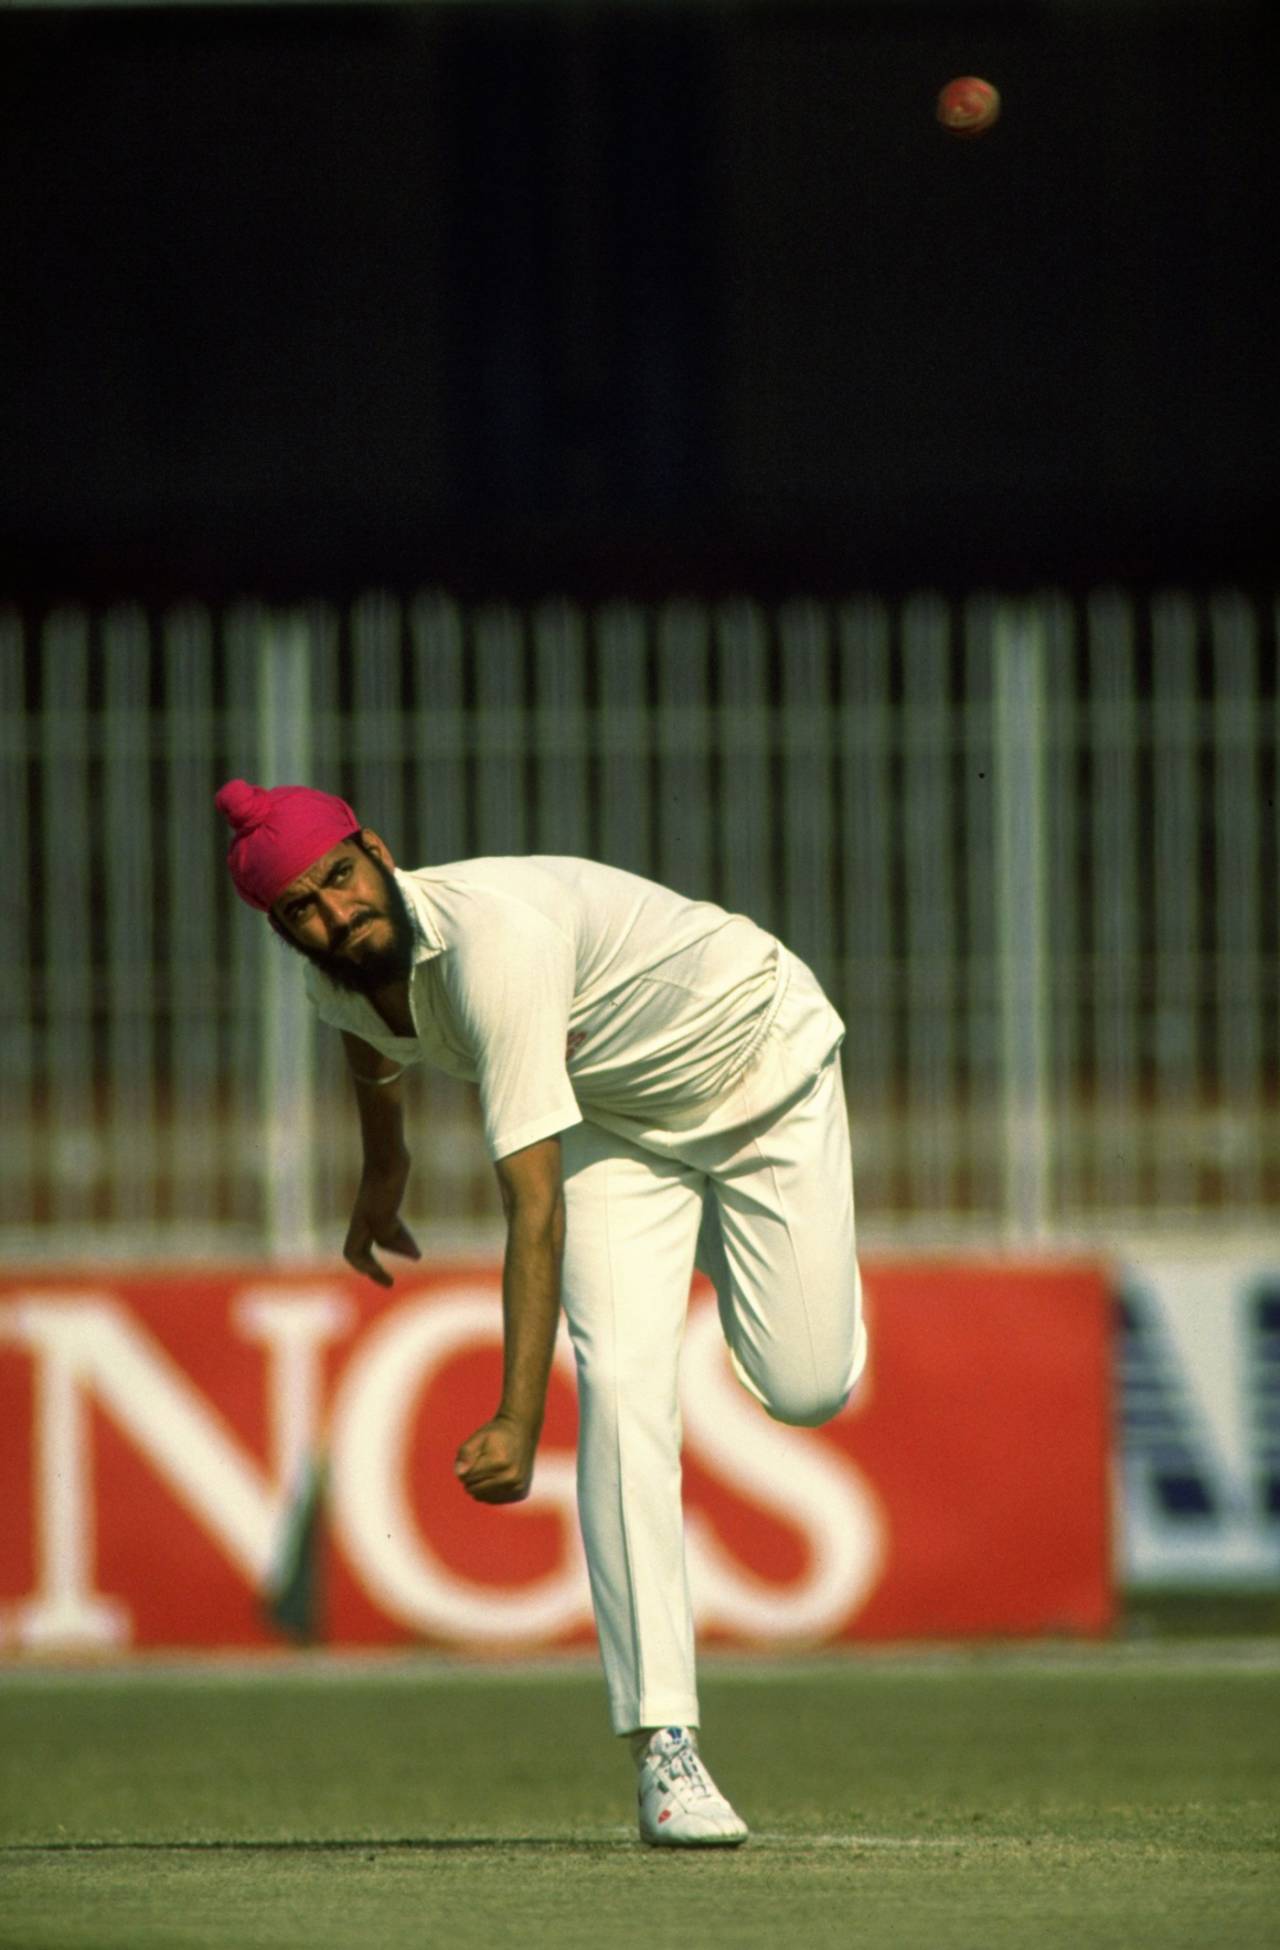 In the 1987 Bangalore Test, India's spinners struggled on a very helpful pitch because they didn't change their length and direction to make Pakistan's batsmen play often enough&nbsp;&nbsp;&bull;&nbsp;&nbsp;Ben Radford/Getty Images